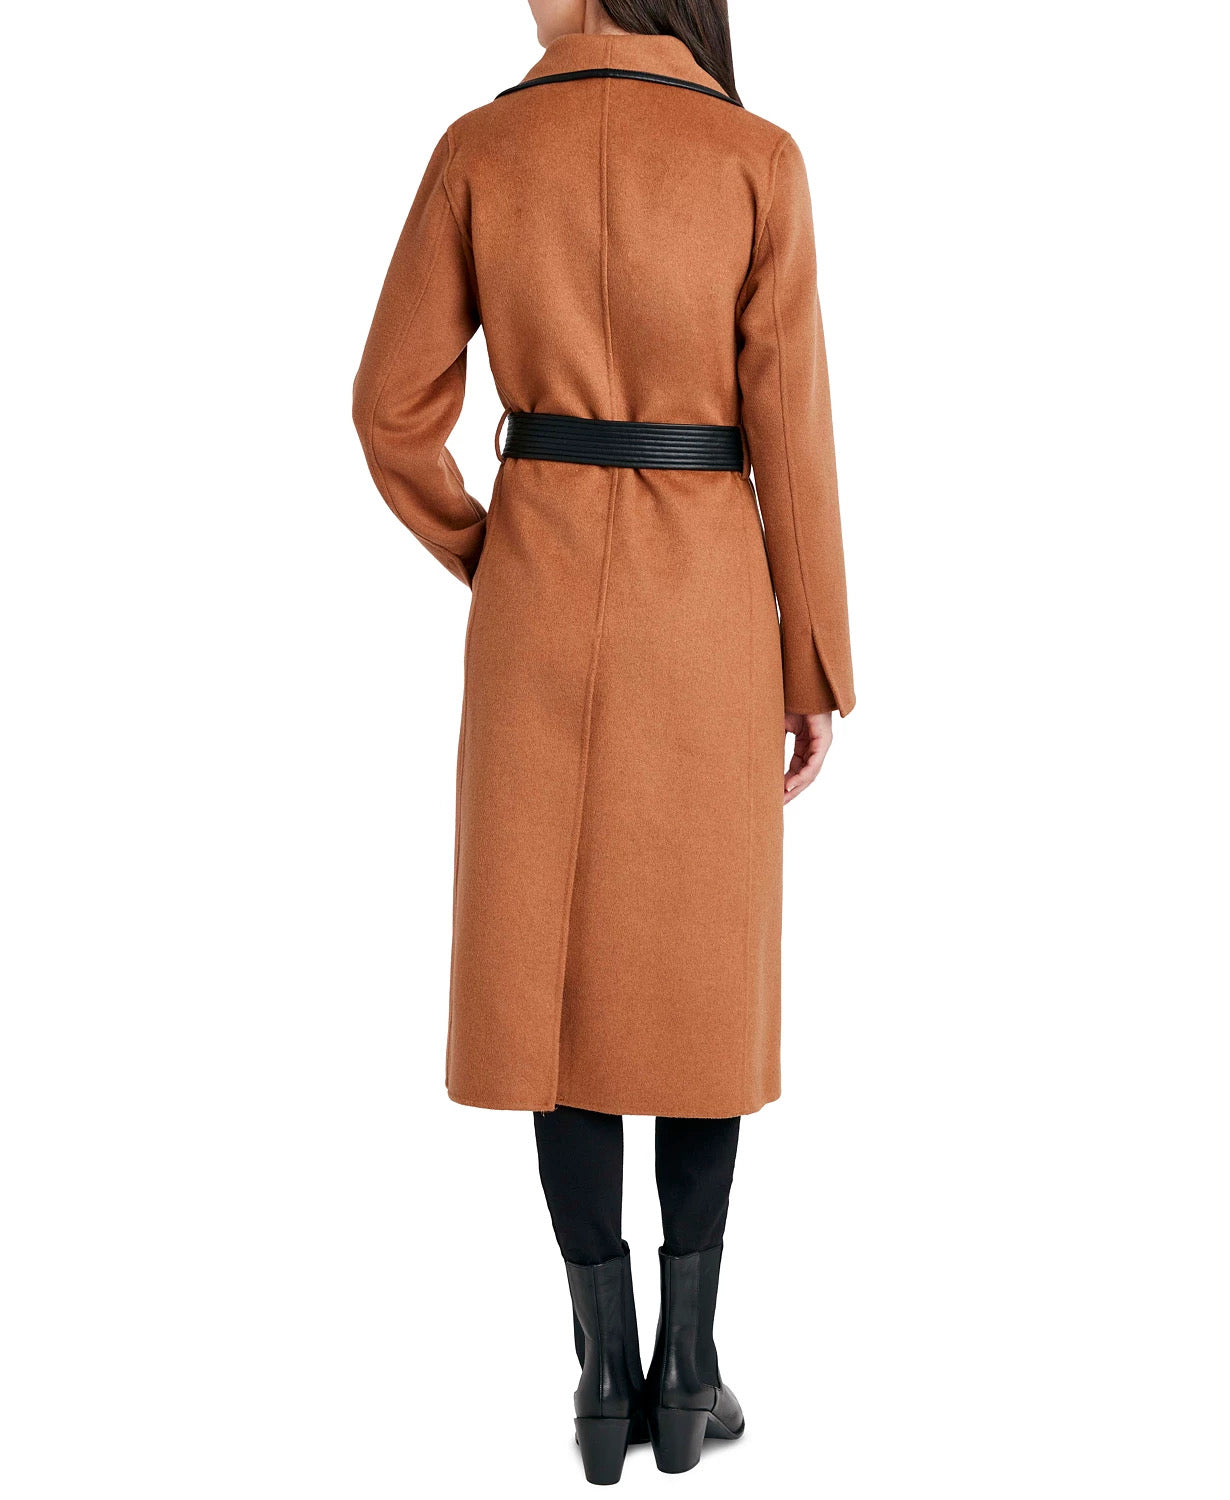 Tahari Womens Plus Size Faux-Leather-Trim Belted Wrap Coat 1X Caramel Brown